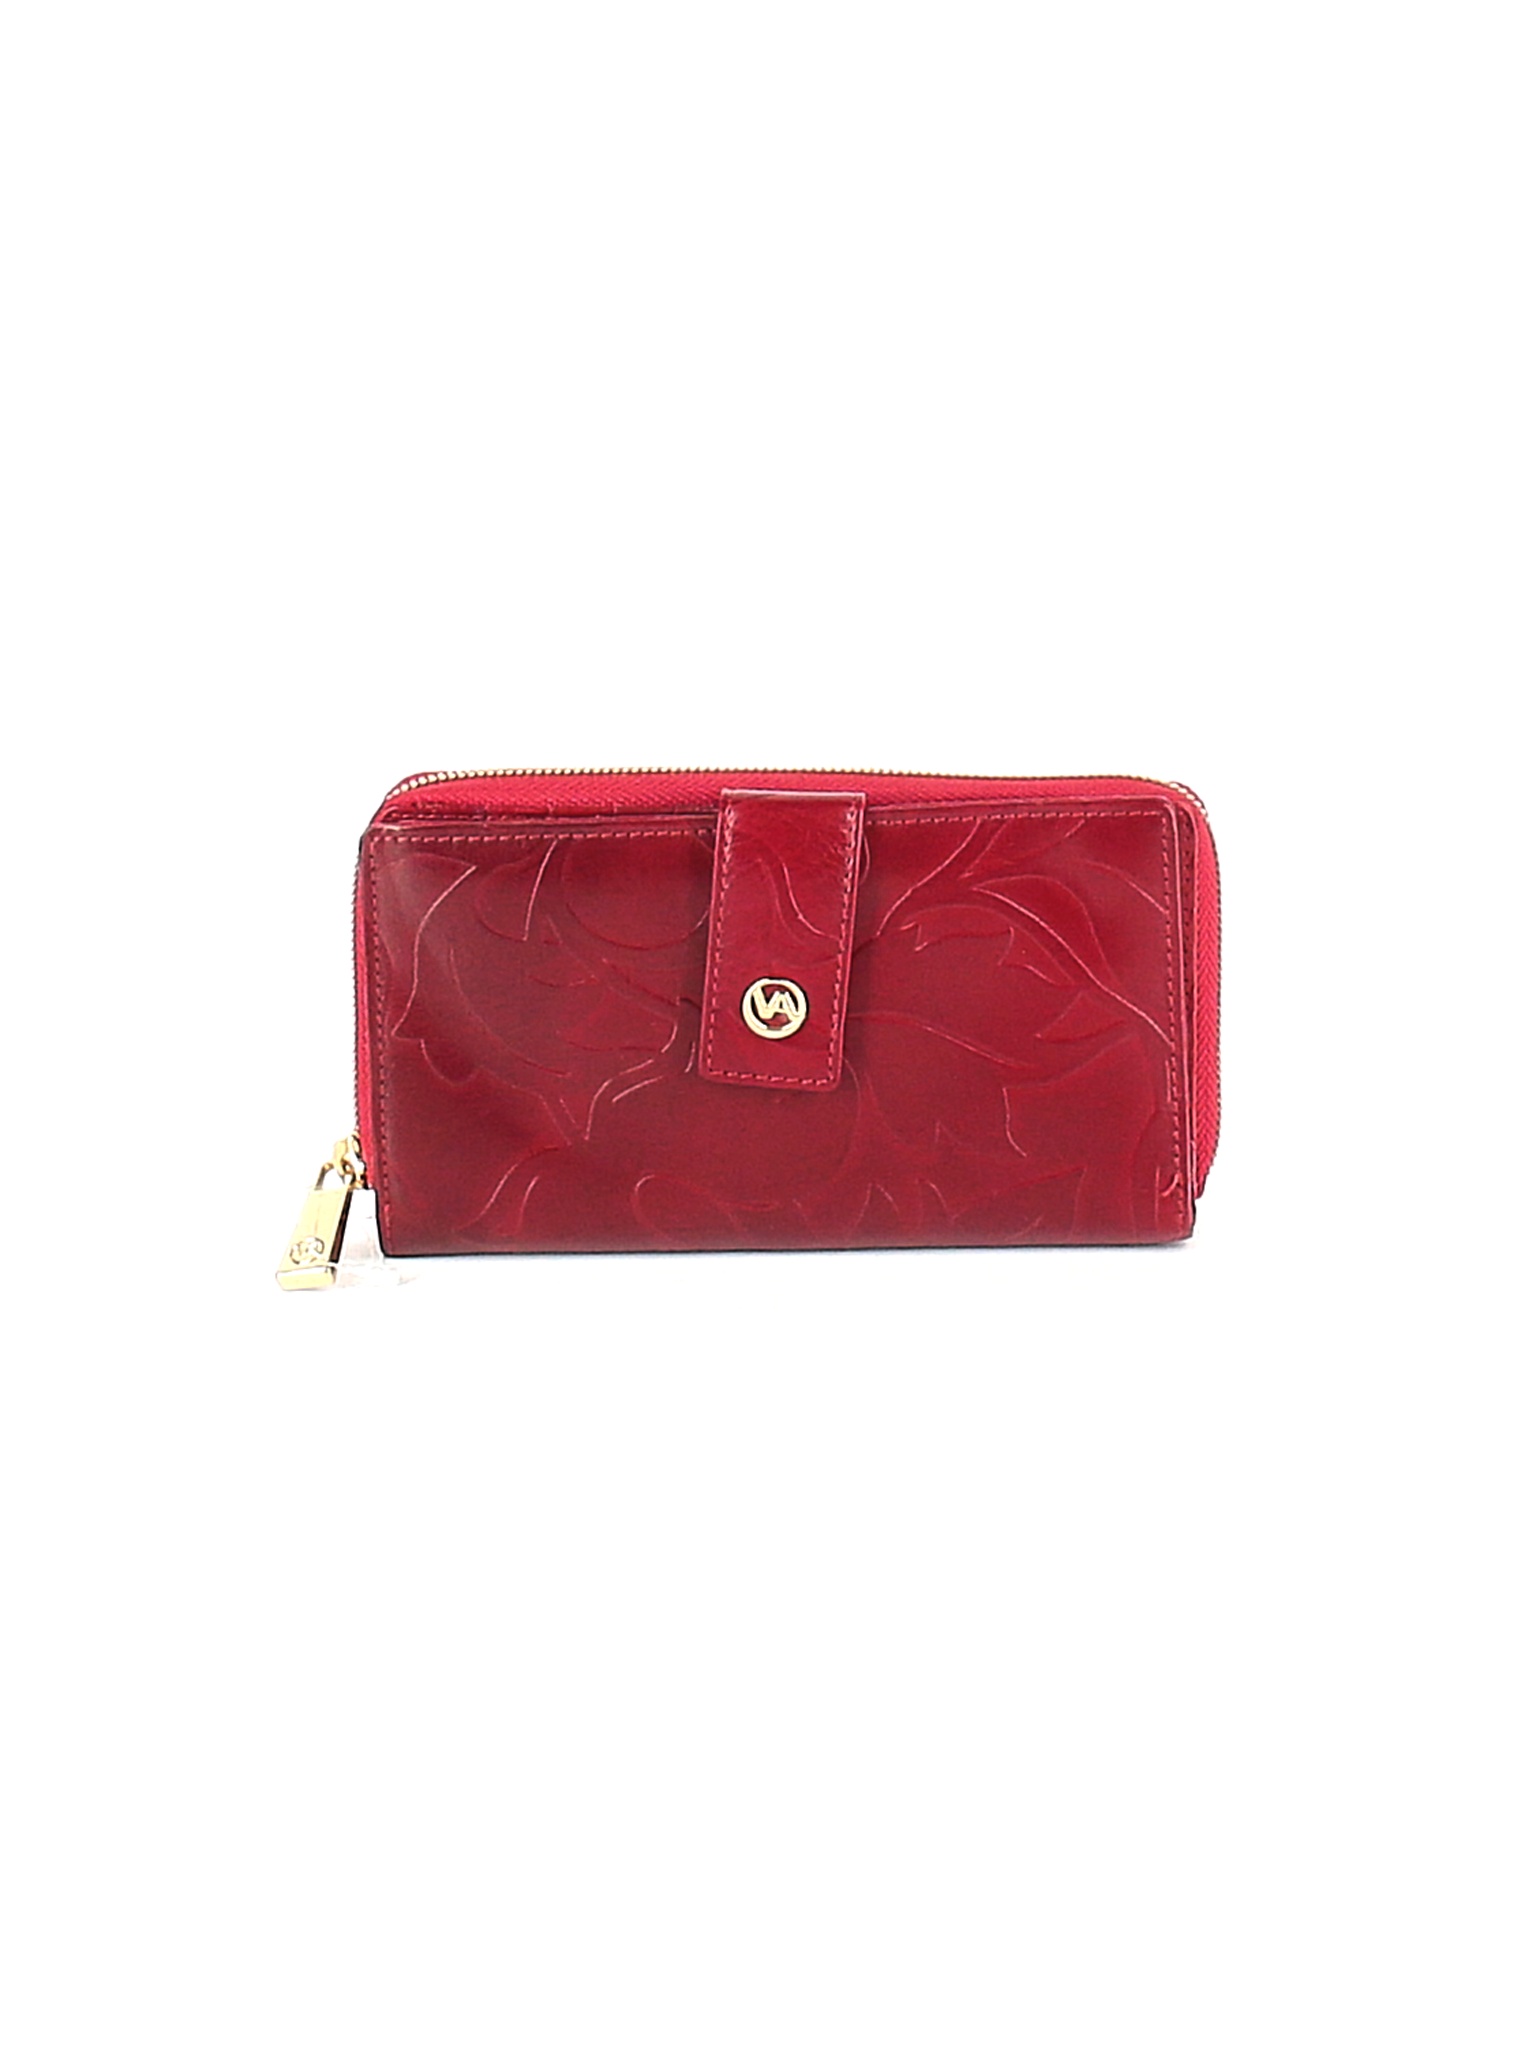 Valentina Women Red Leather Wallet One Size | eBay